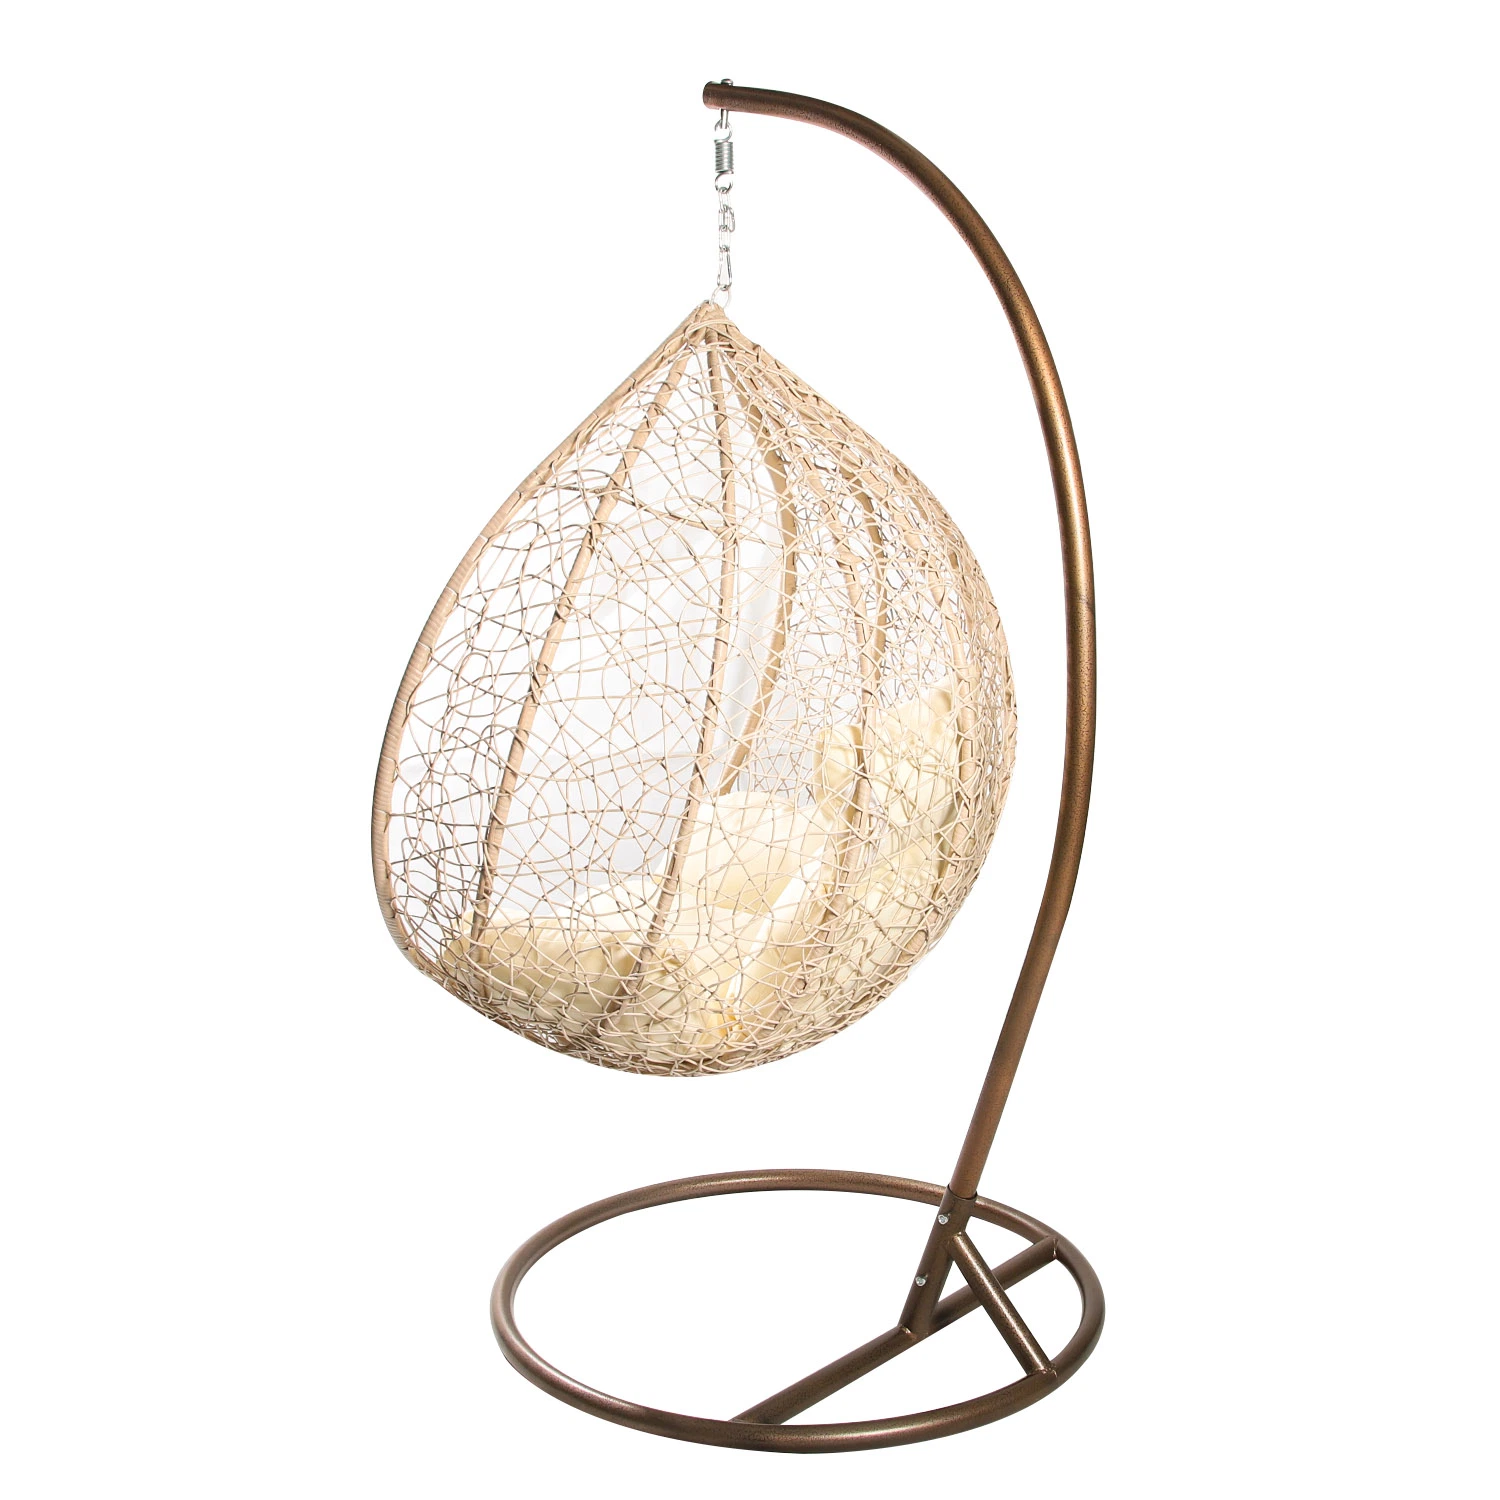 Nest Chair Swing Sitting Bird Cage Nest Big Large Nest Bedroom Egg Swing Chair with Stand